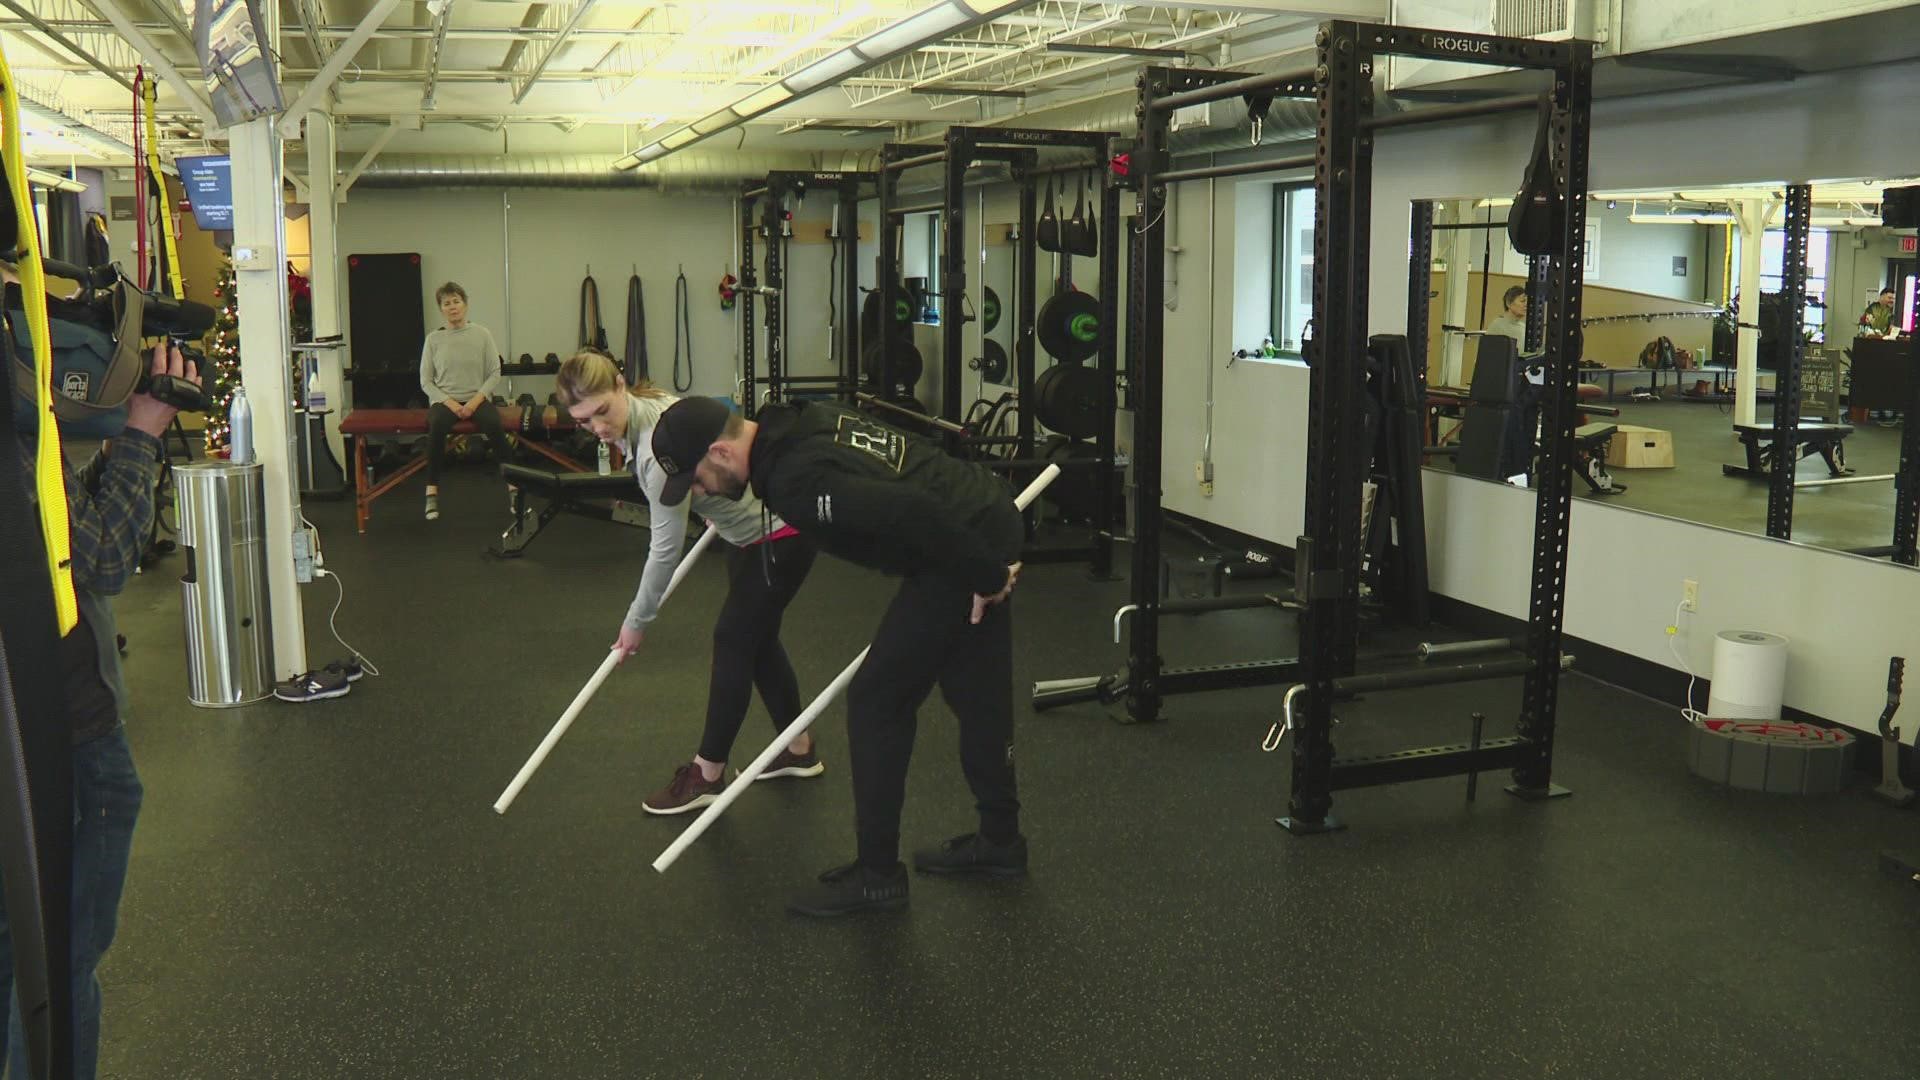 Andrew Blais from The Form Lab offers tips for shoveling without pain afterward.